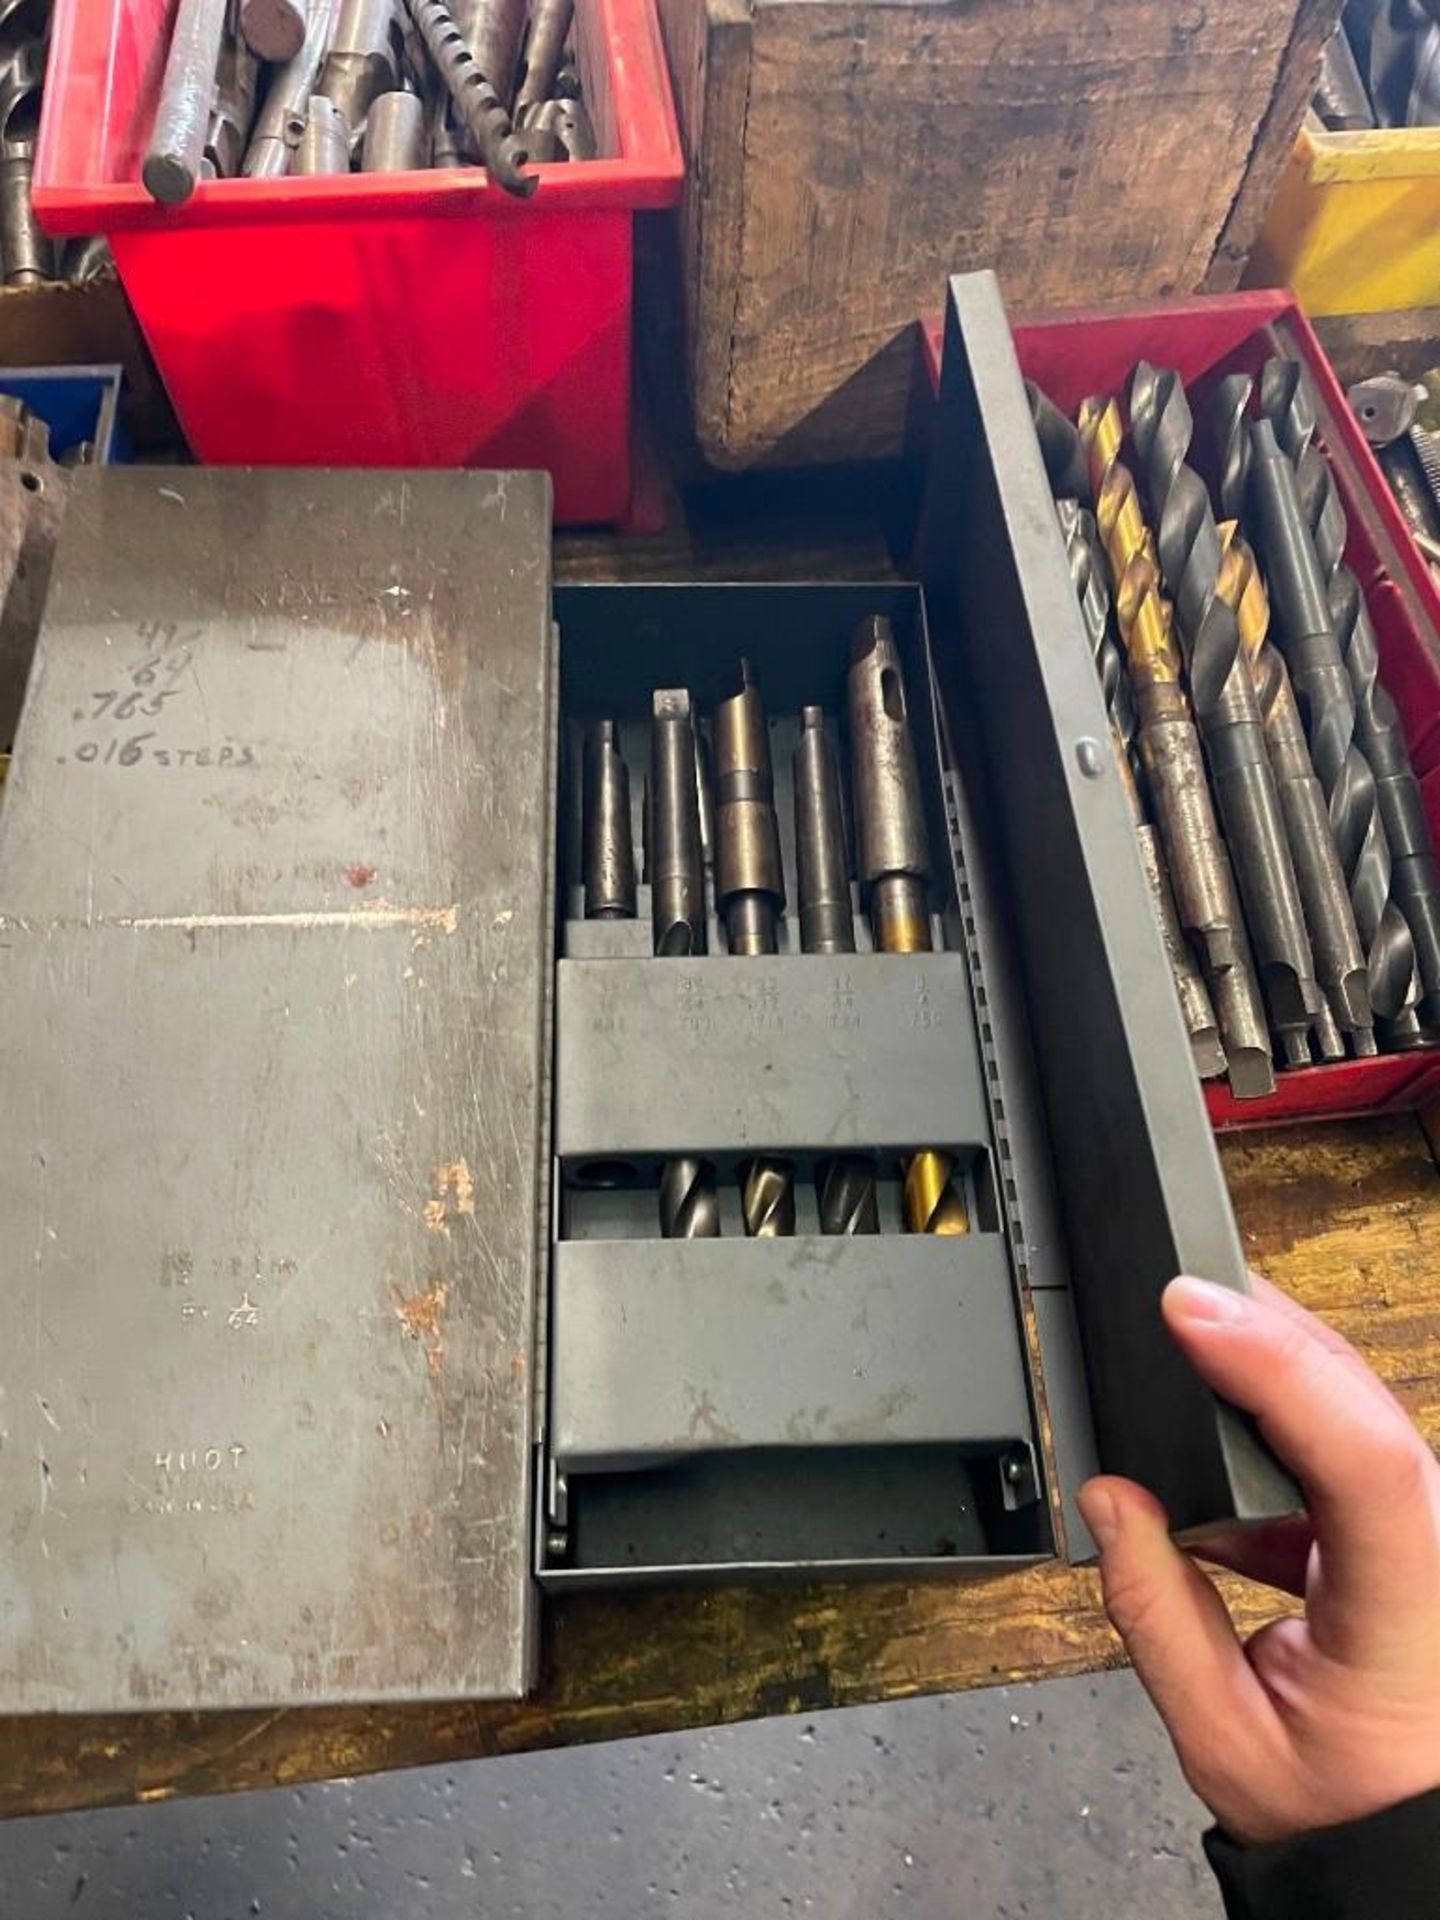 LARGE LOT OF DRILL BITS, REAMERS, IMPACT SOCKETS, MILLING AND LATHE TOOLING - Image 9 of 10